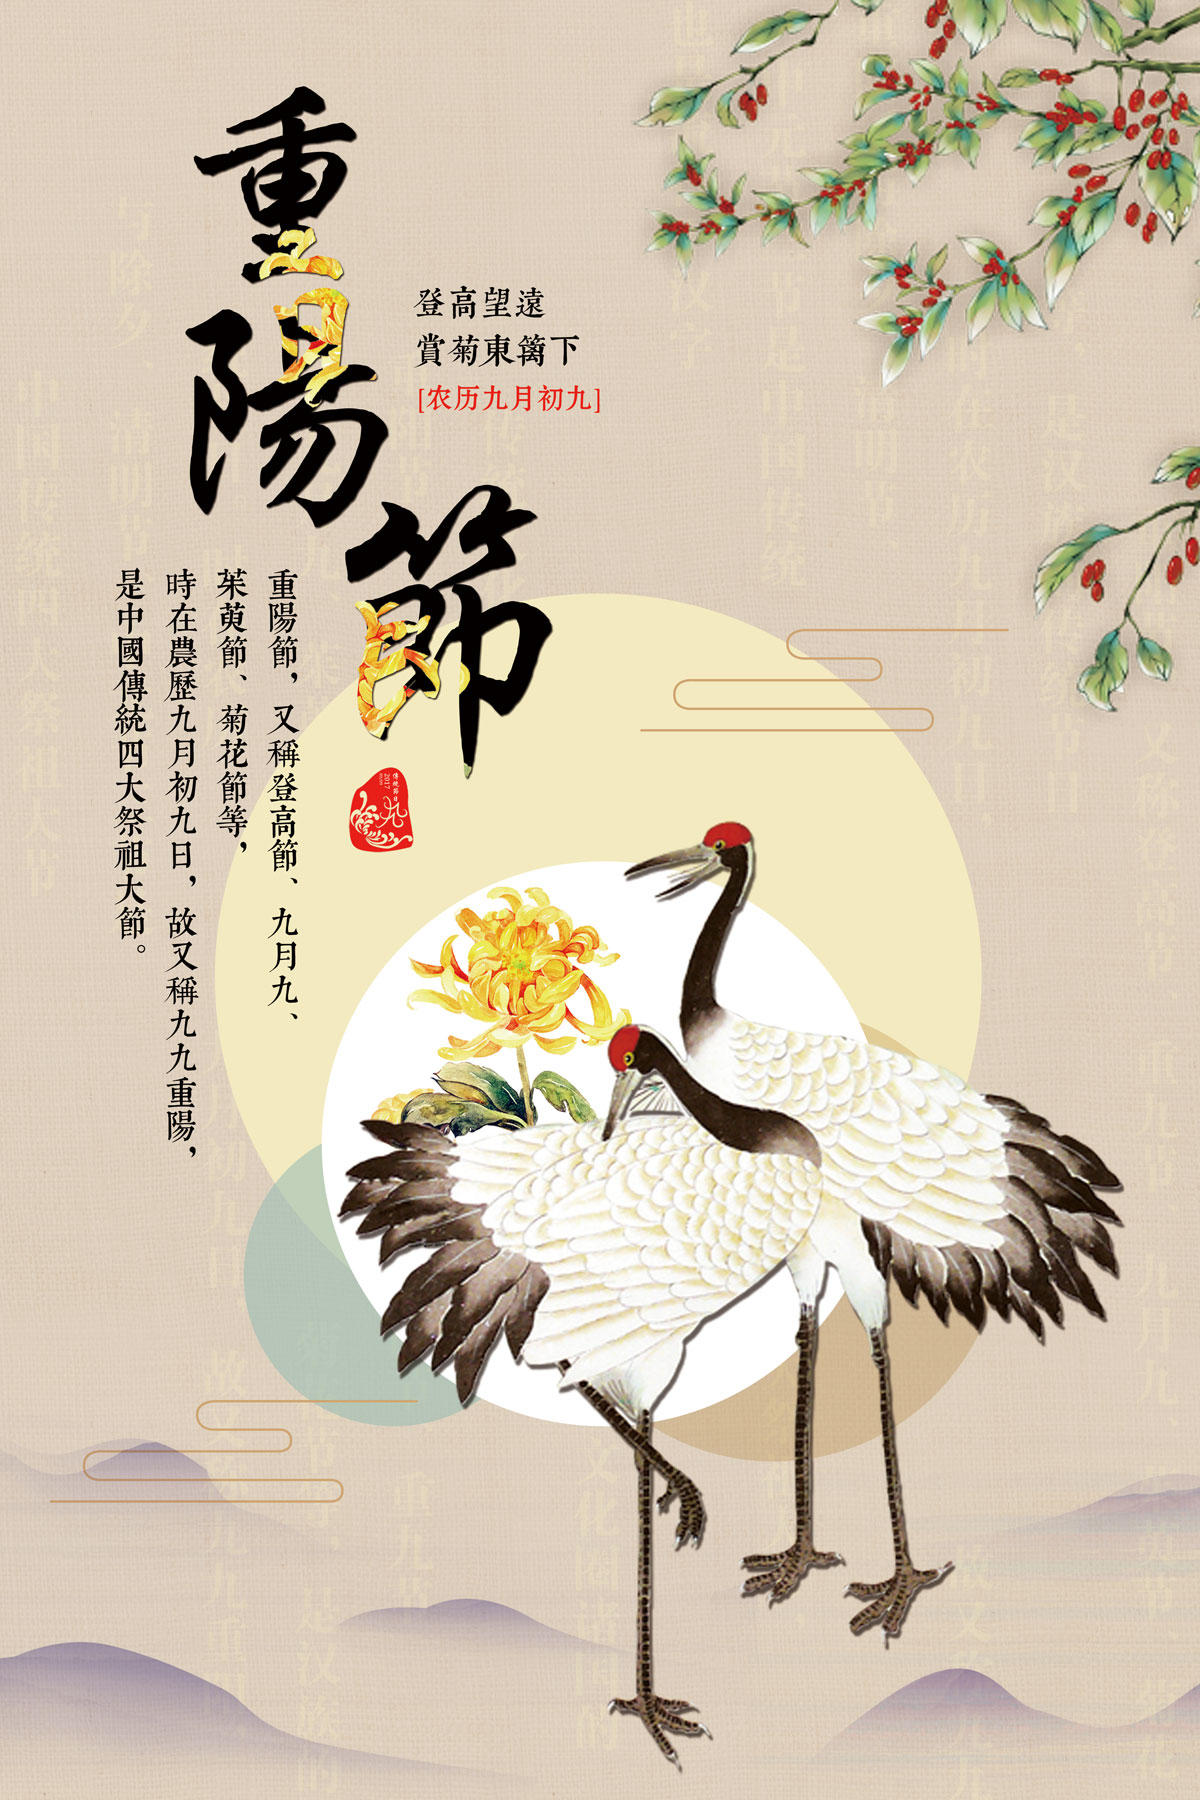 Chinese classical double ninth festival celebration poster design scheme -  China PSD File Free Download